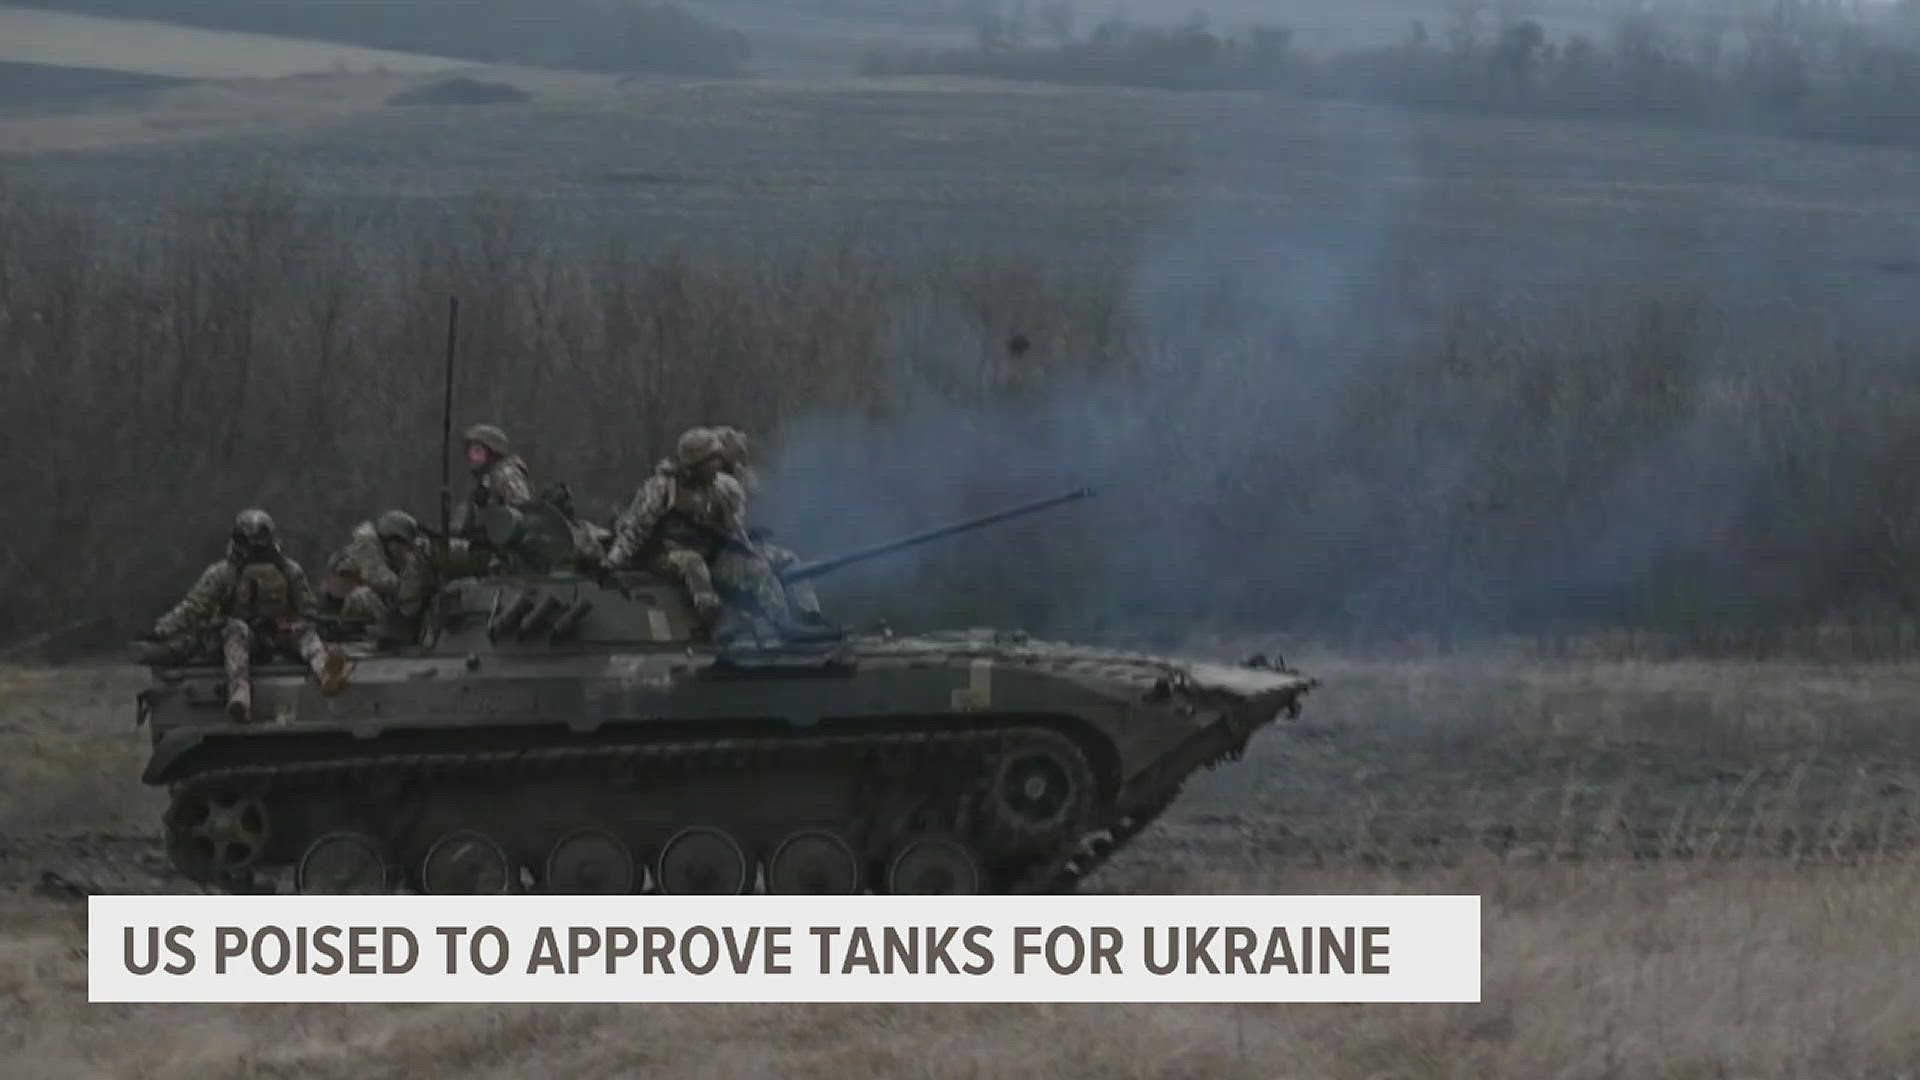 As the world marks the eleventh month of Russia's invasion of Ukraine, the federal government is preparing to send 30 MR Abrams tanks to aid the country.